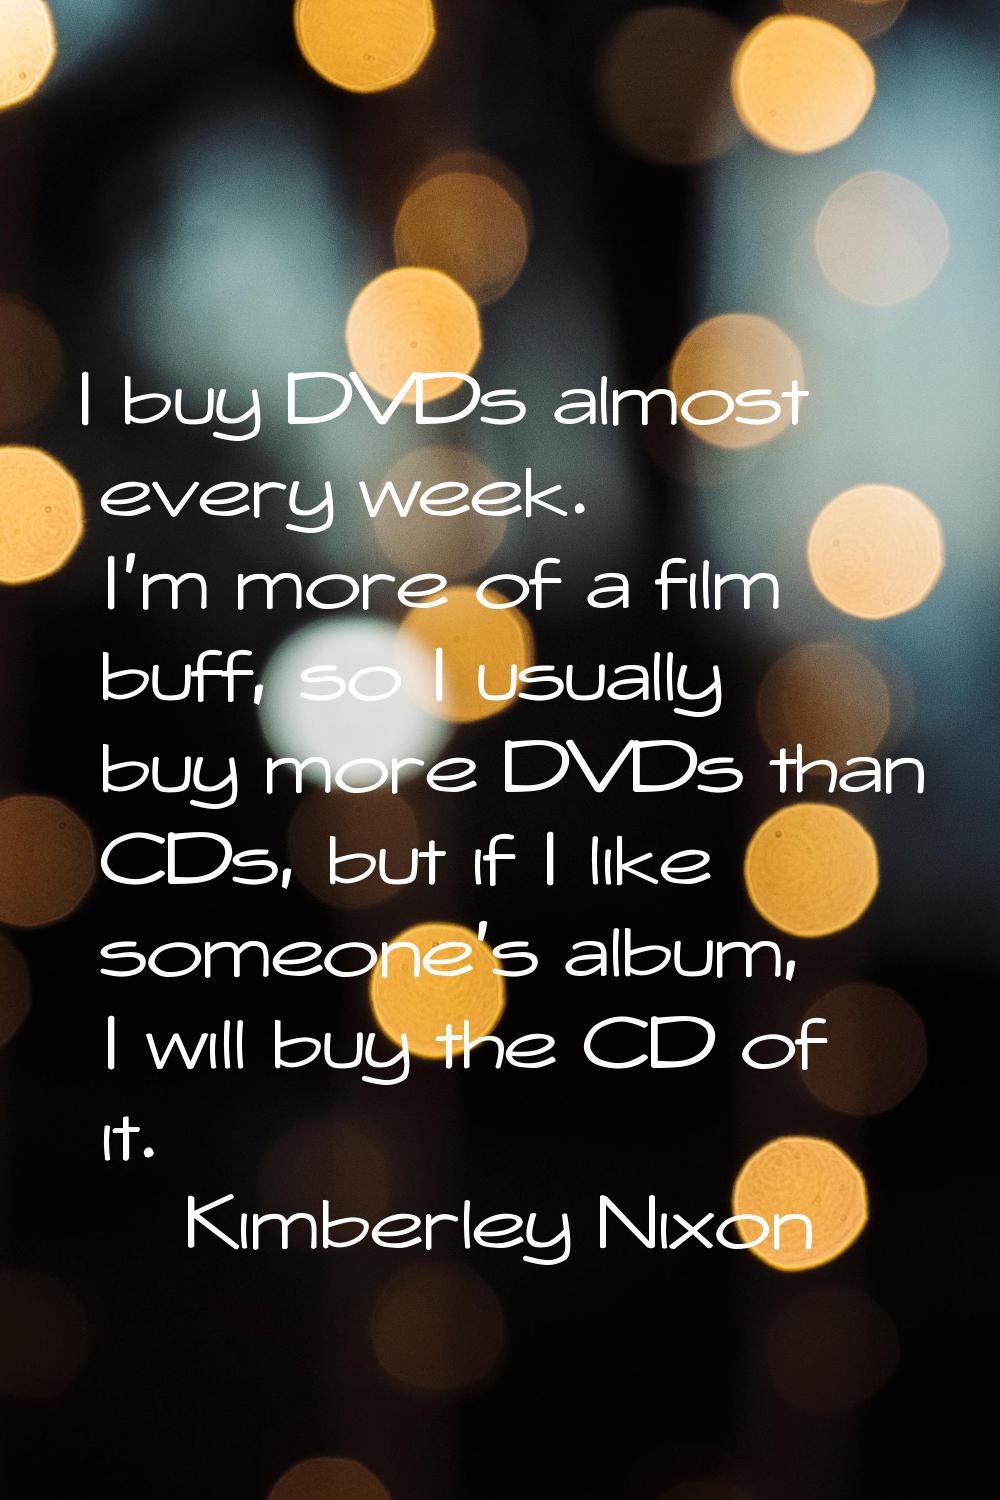 I buy DVDs almost every week. I'm more of a film buff, so I usually buy more DVDs than CDs, but if 